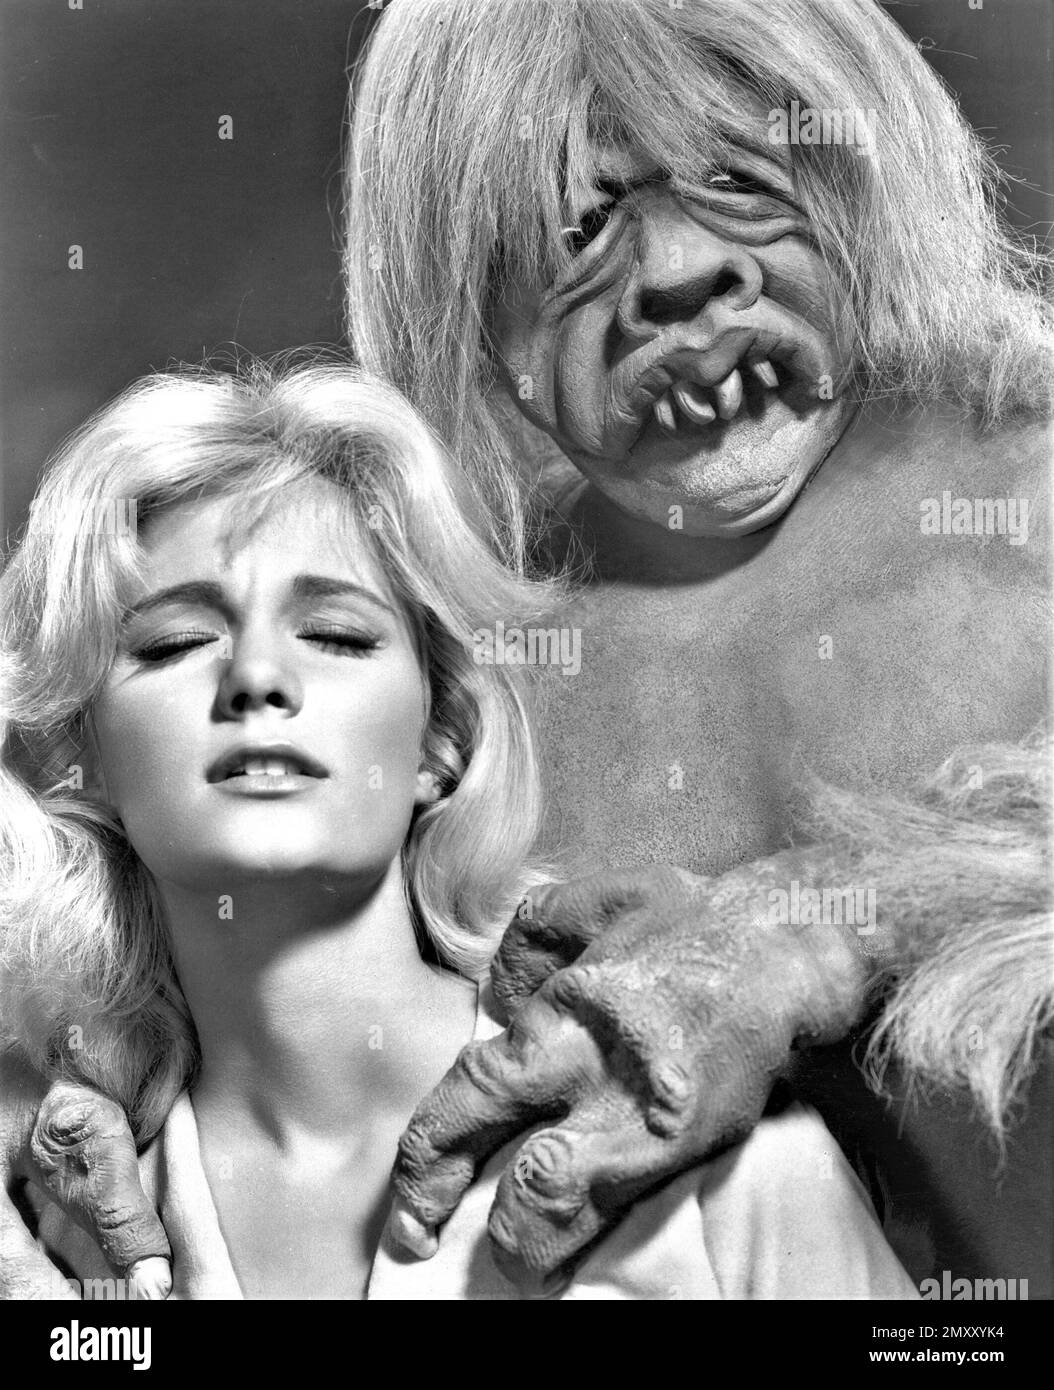 YVETTE MIMIEUX in THE TIME MACHINE (1960), directed by GEORGE PAL. Credit: M.G.M. / Album Stock Photo